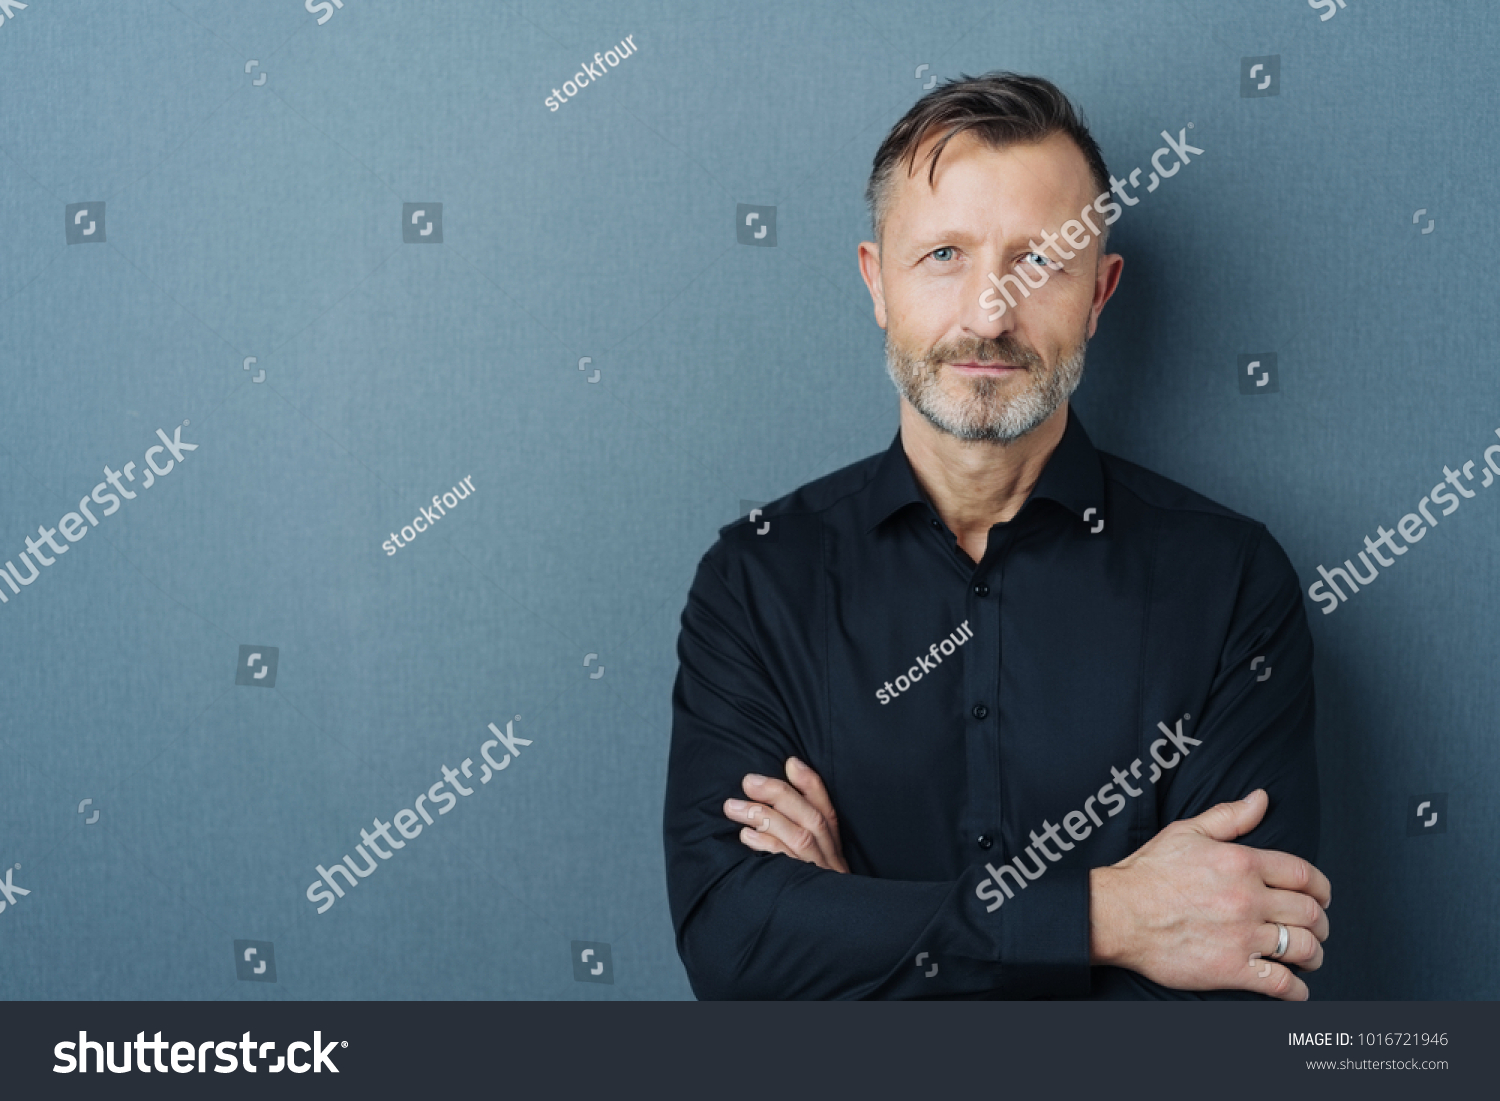 Serious middle-aged man with folded arms and a deadpan expression posing in front of a grey background with copy space #1016721946